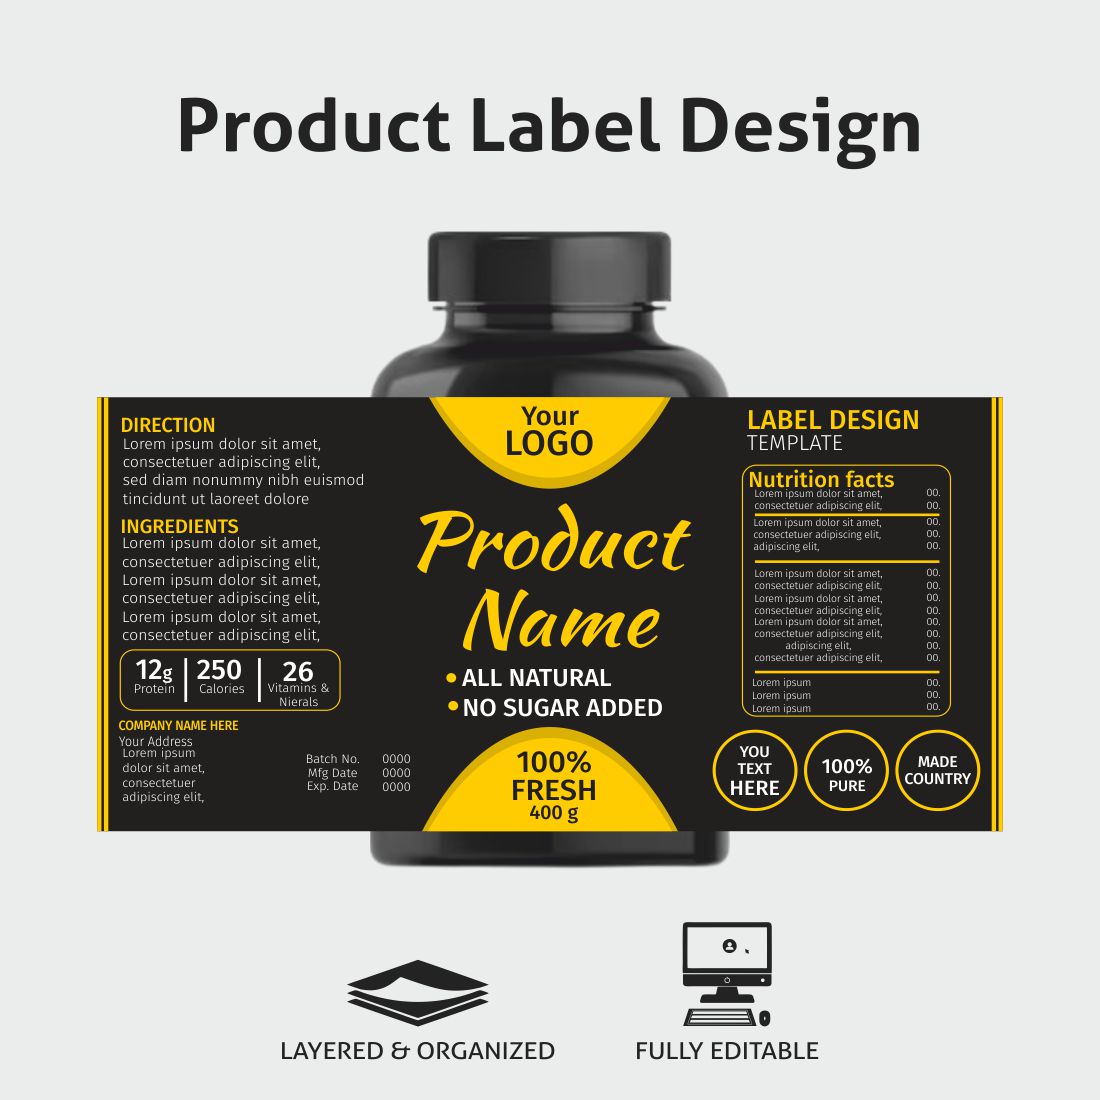 Product Label Design cover image.